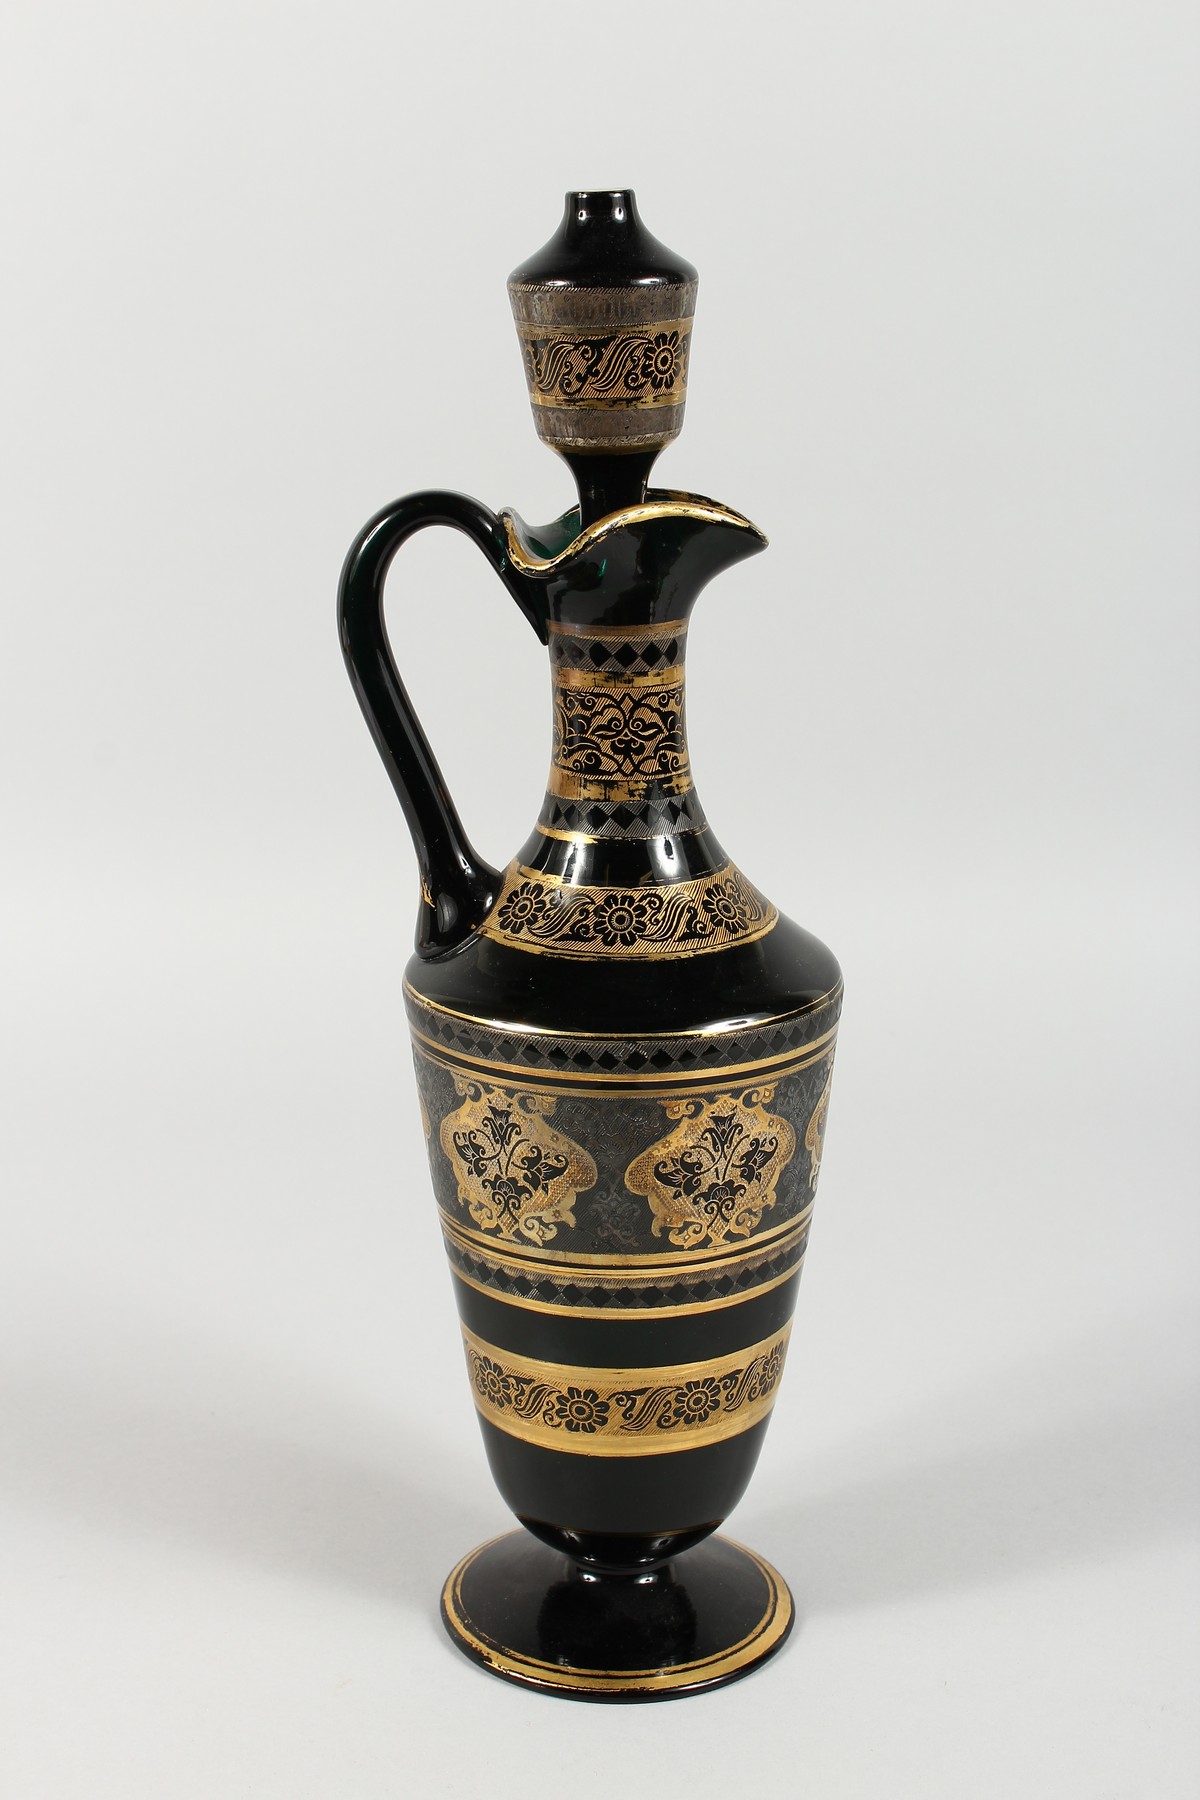 A CONTINENTAL DARK GREEN GLASS EWER AND STOPPER, with etched and gilded decoration. 14ins high. - Image 4 of 11